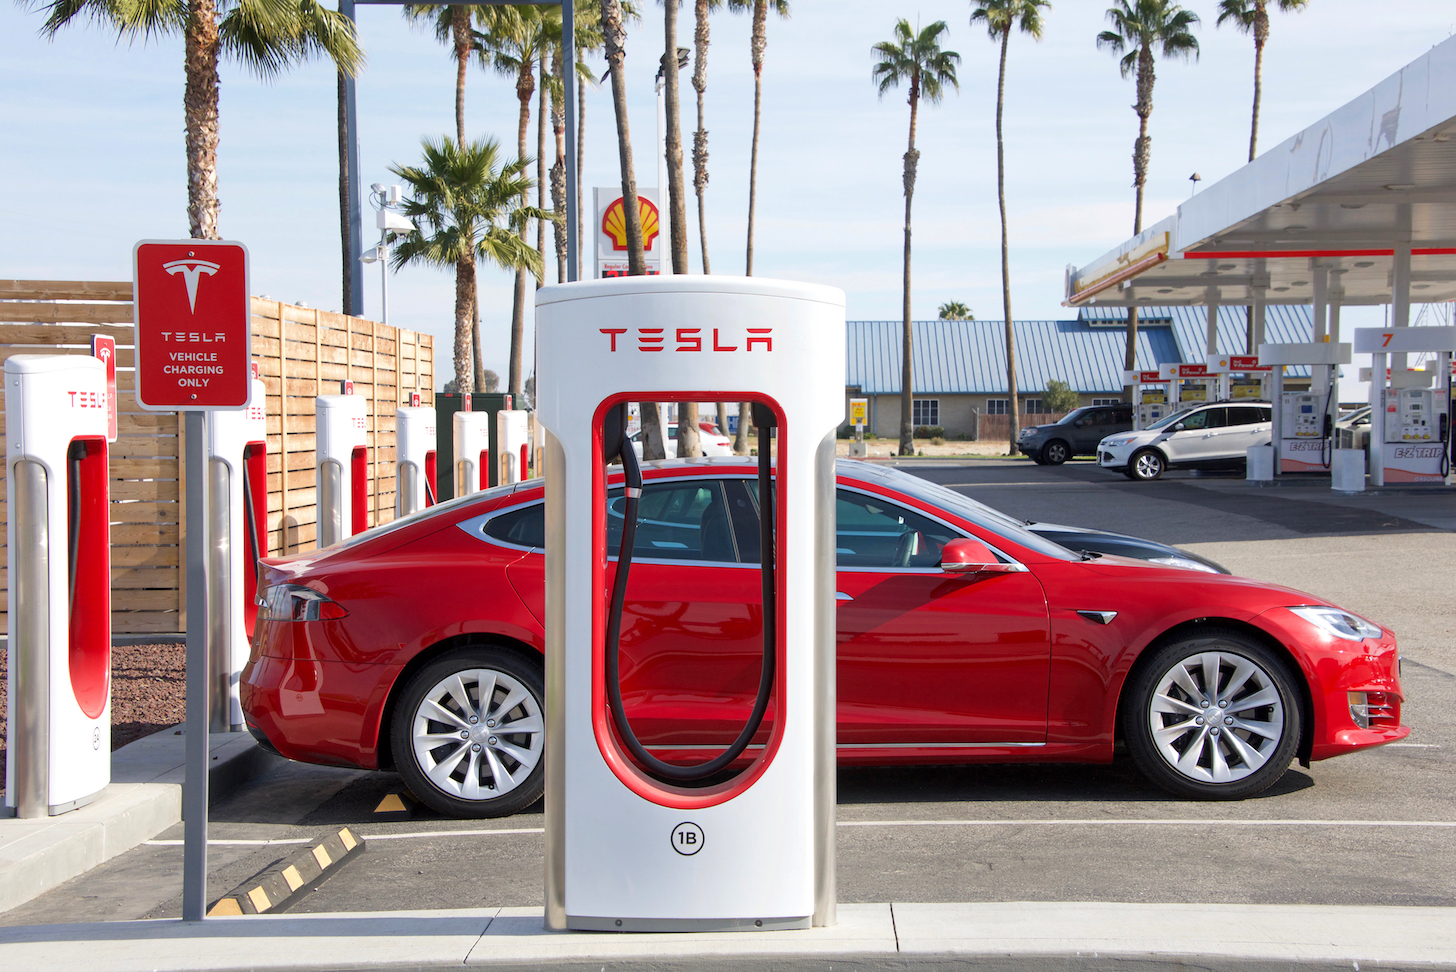 Tesla Takes a New Turn: Scaling Back on Mega Goals Amid Stiff Competition and Market Shifts